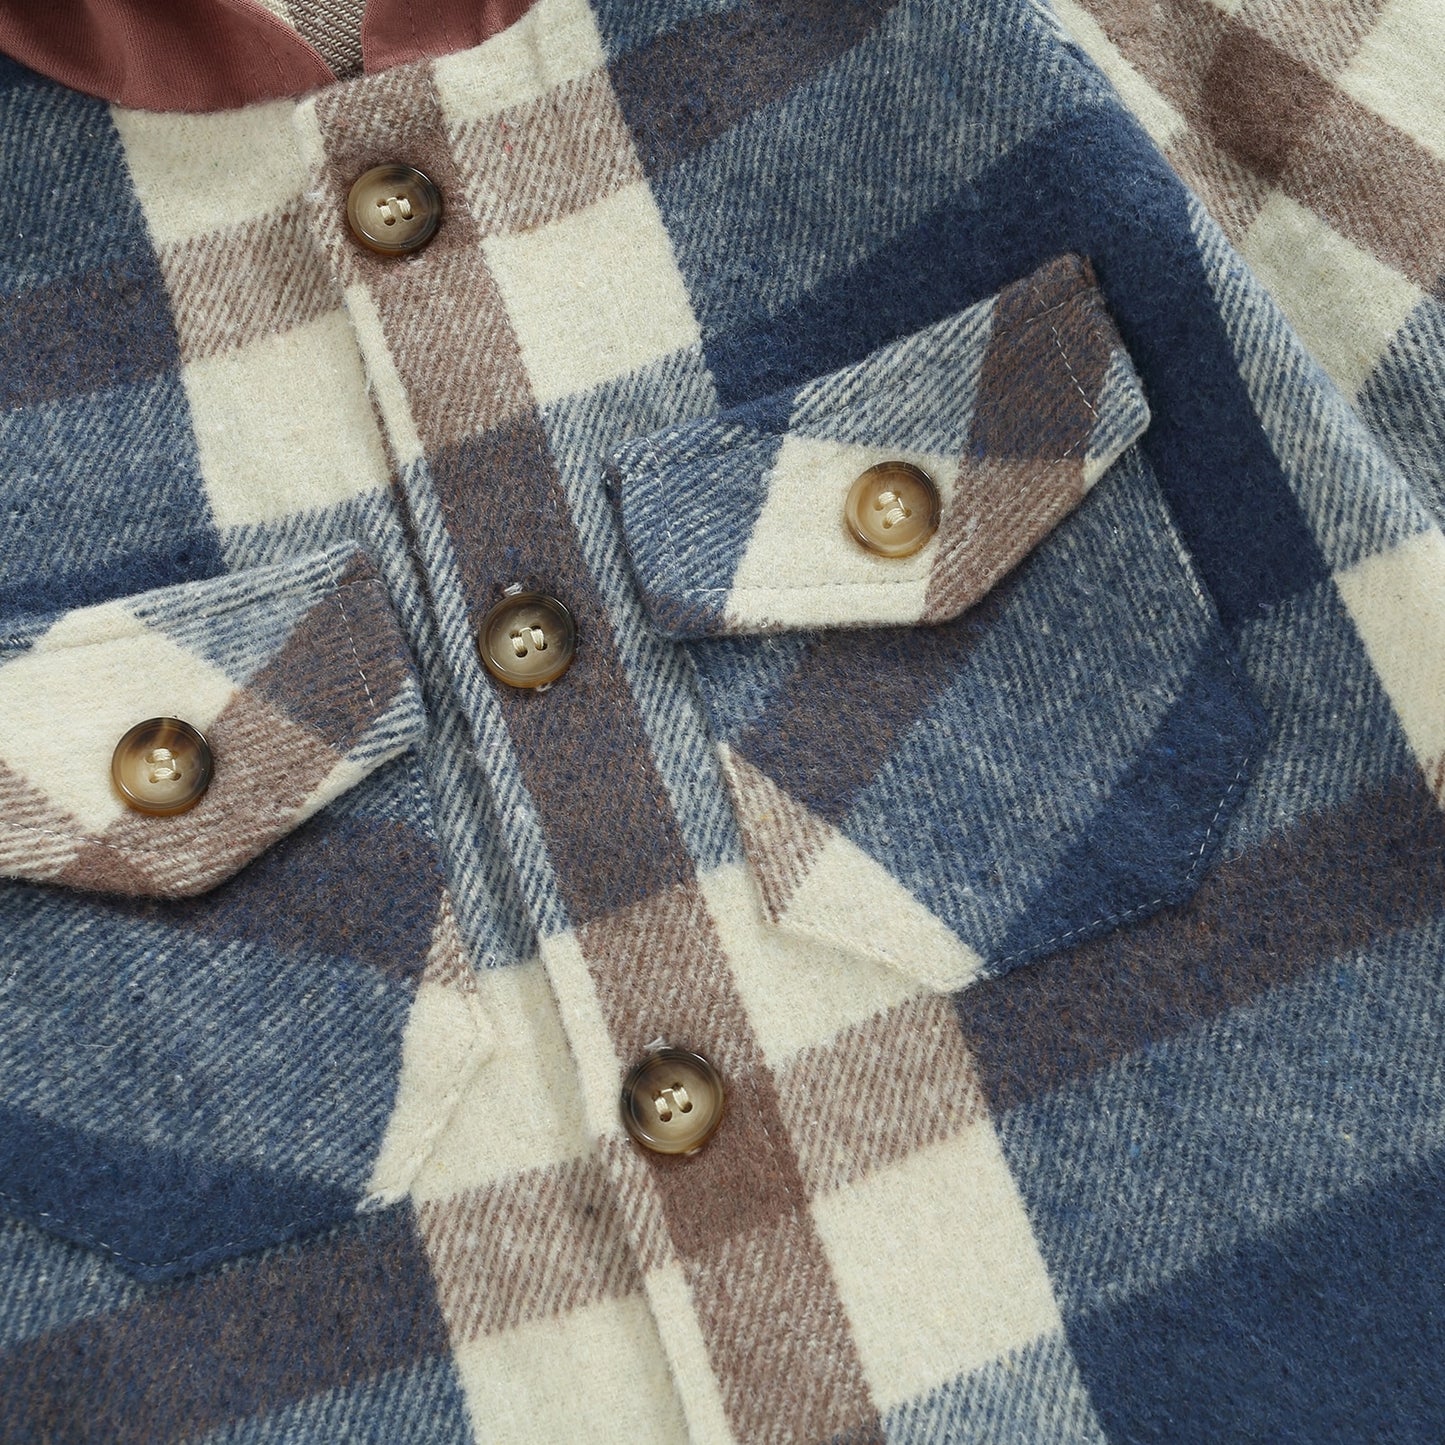 Plaid Hooded Button-Down Jackets